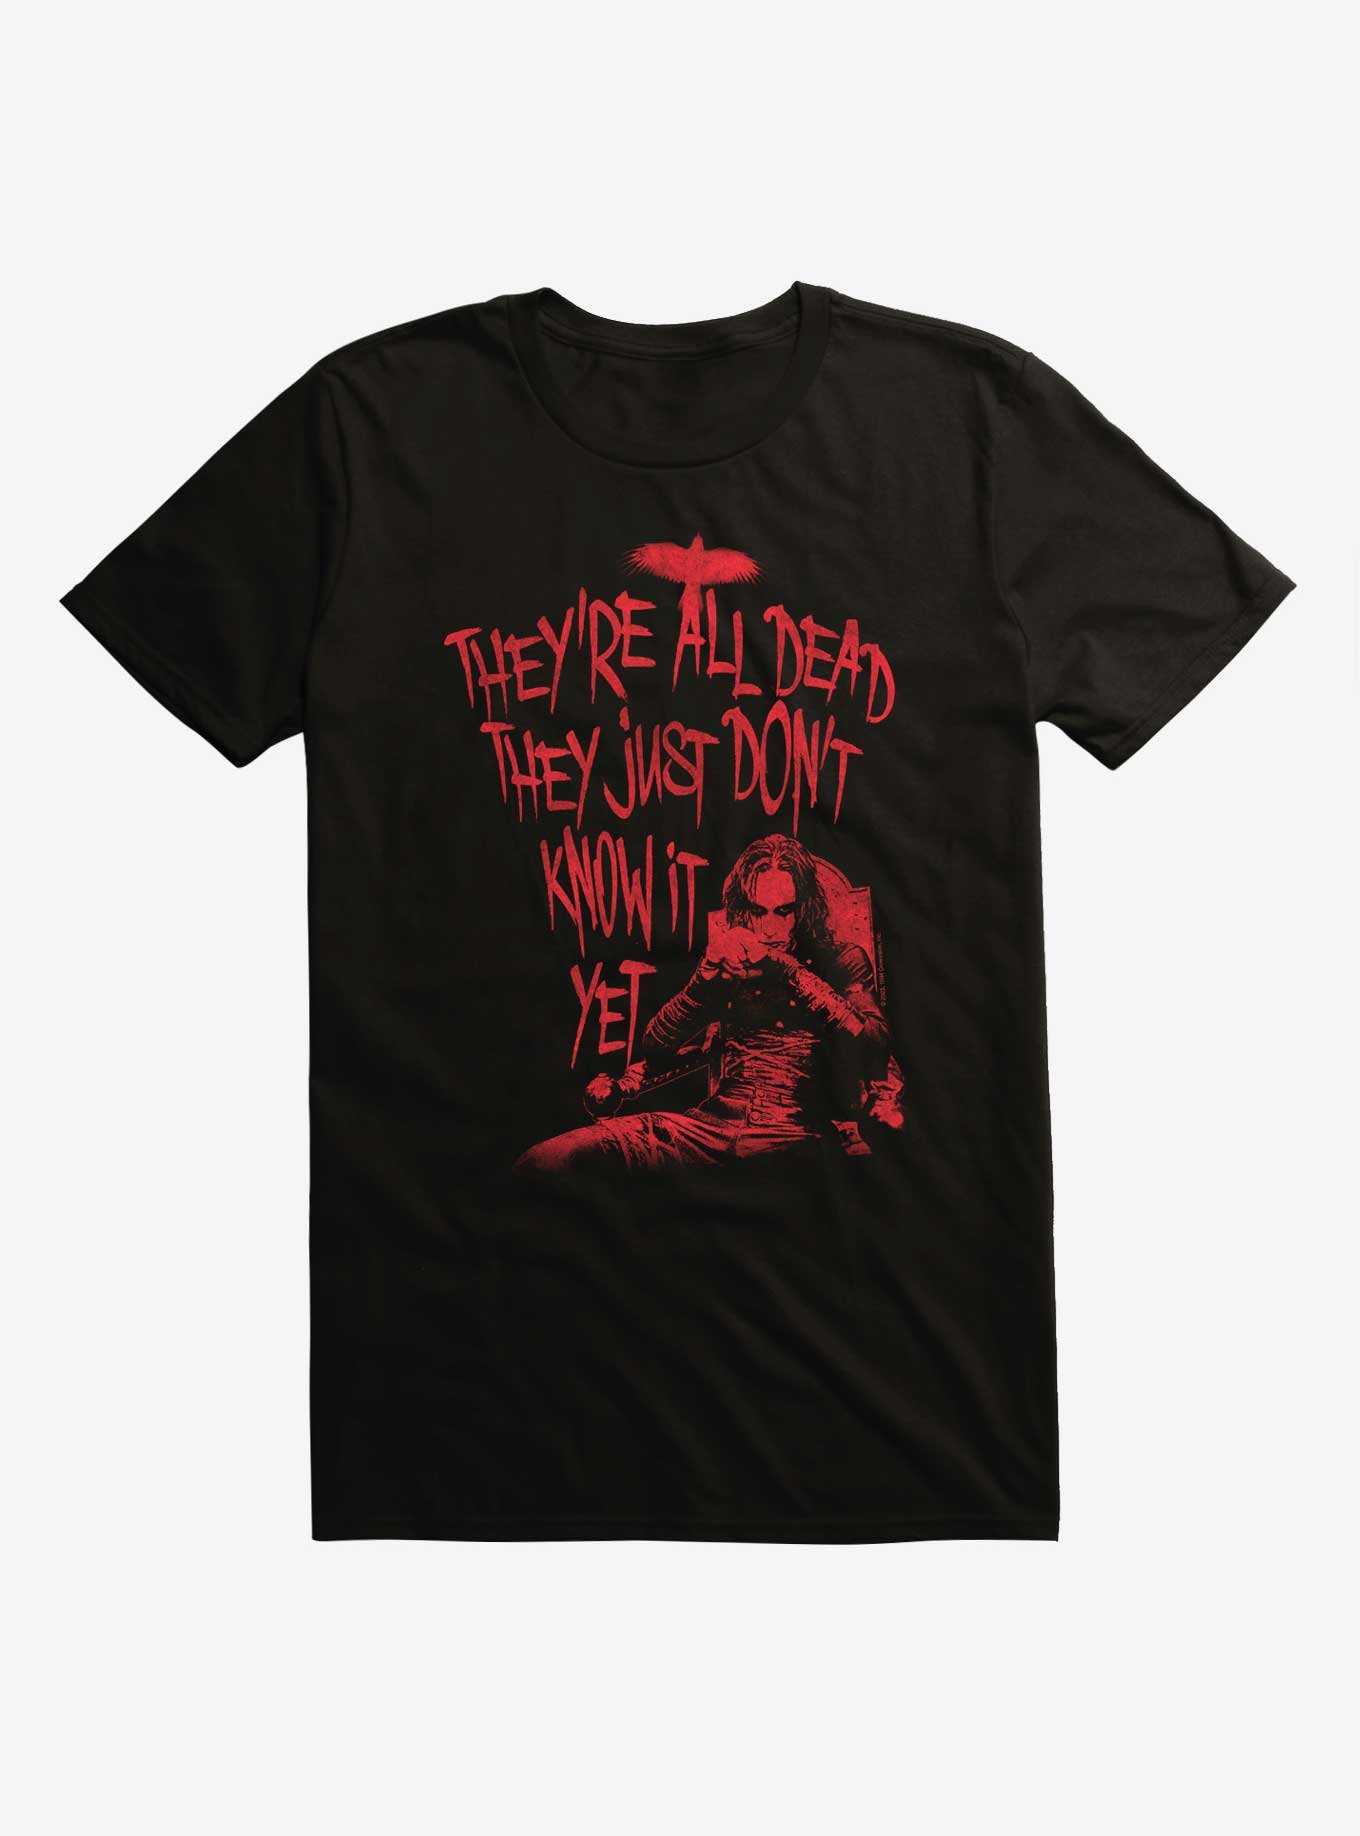 The Crow They Just Don't Know It Yet T-Shirt, , hi-res